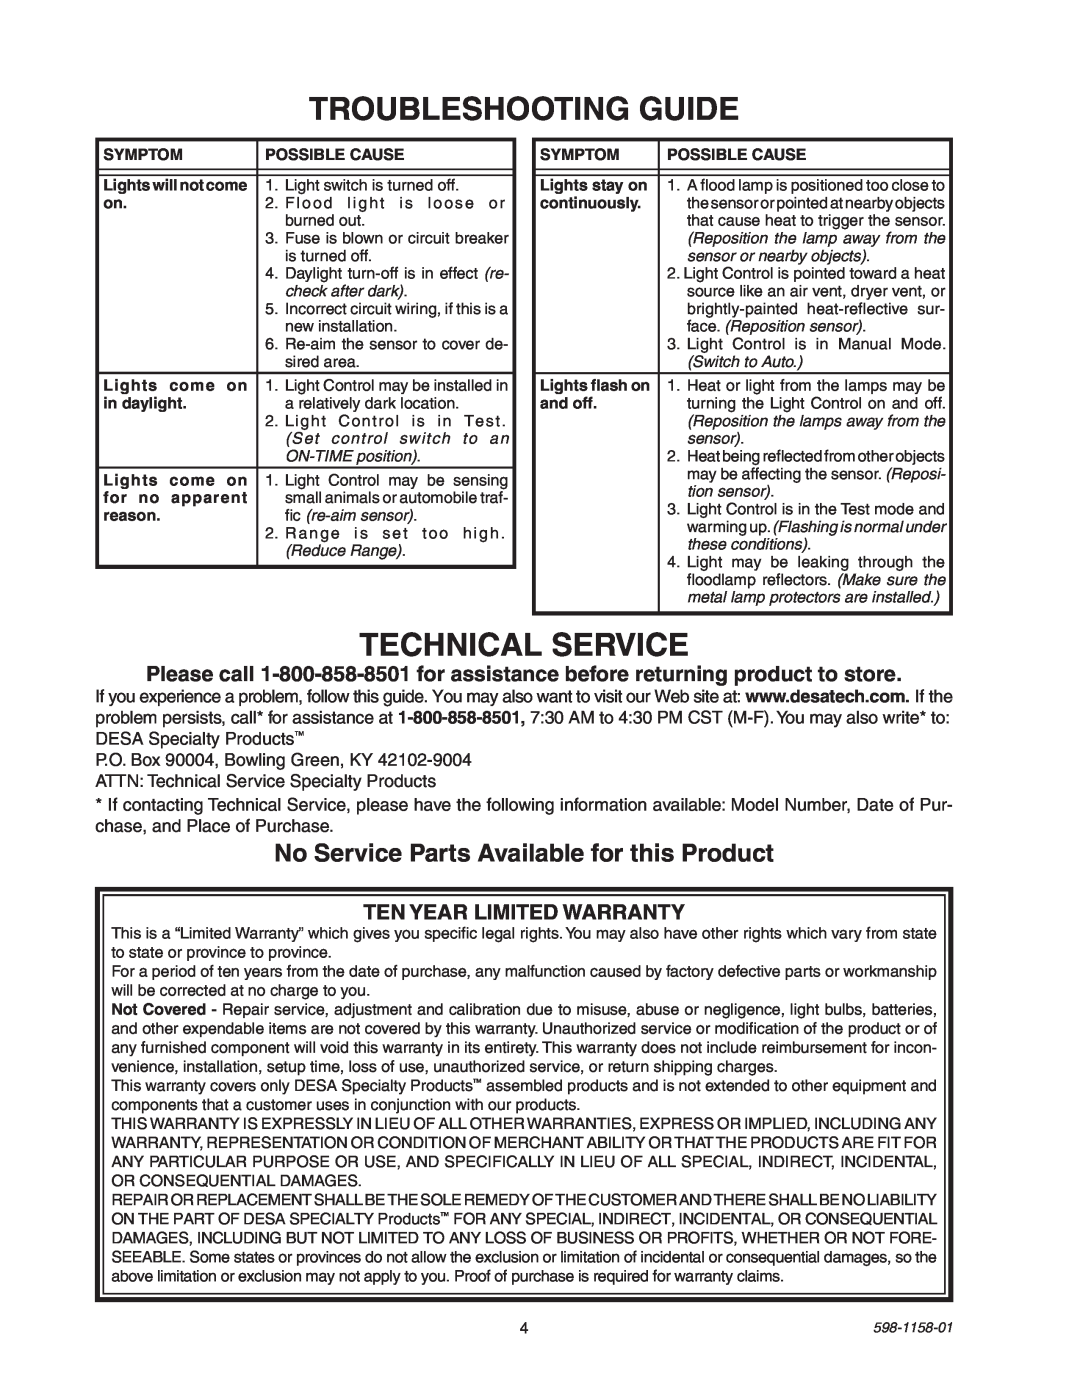 Desa SH-5412 manual Troubleshooting Guide, Technical Service, No Service Parts Available for this Product 